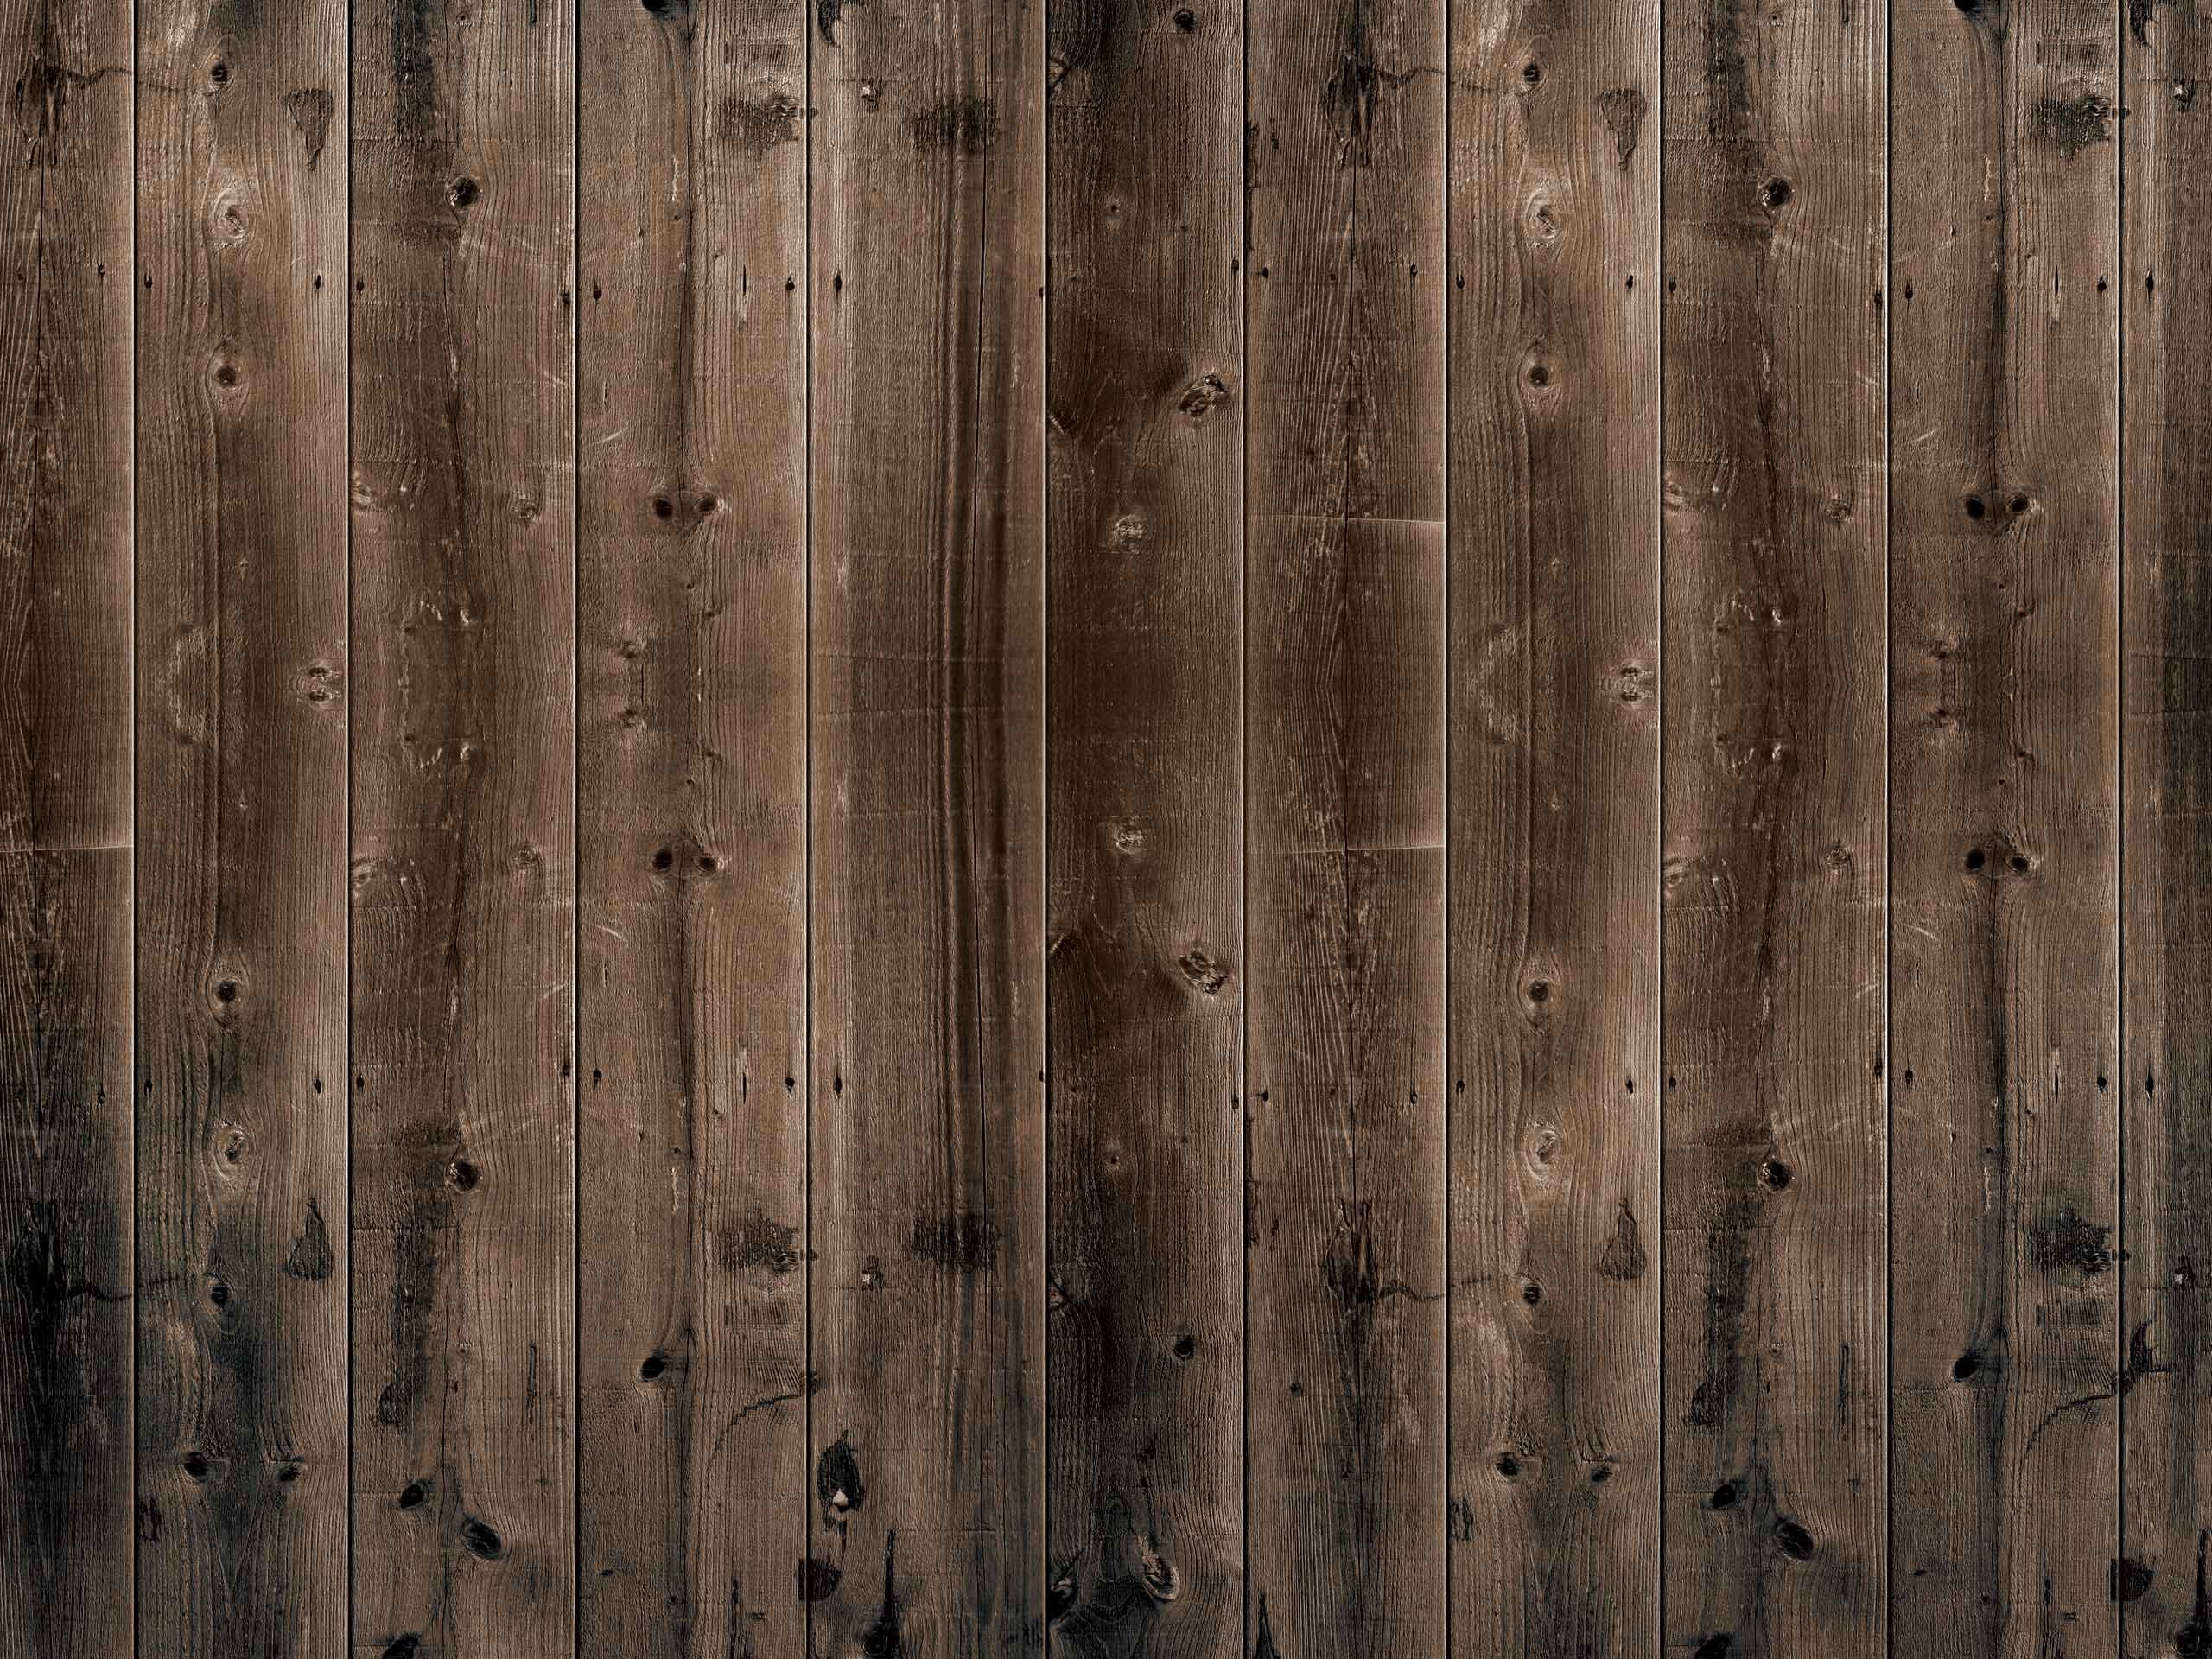 2560x1920 barnwood - Yahoo Search Results..color example